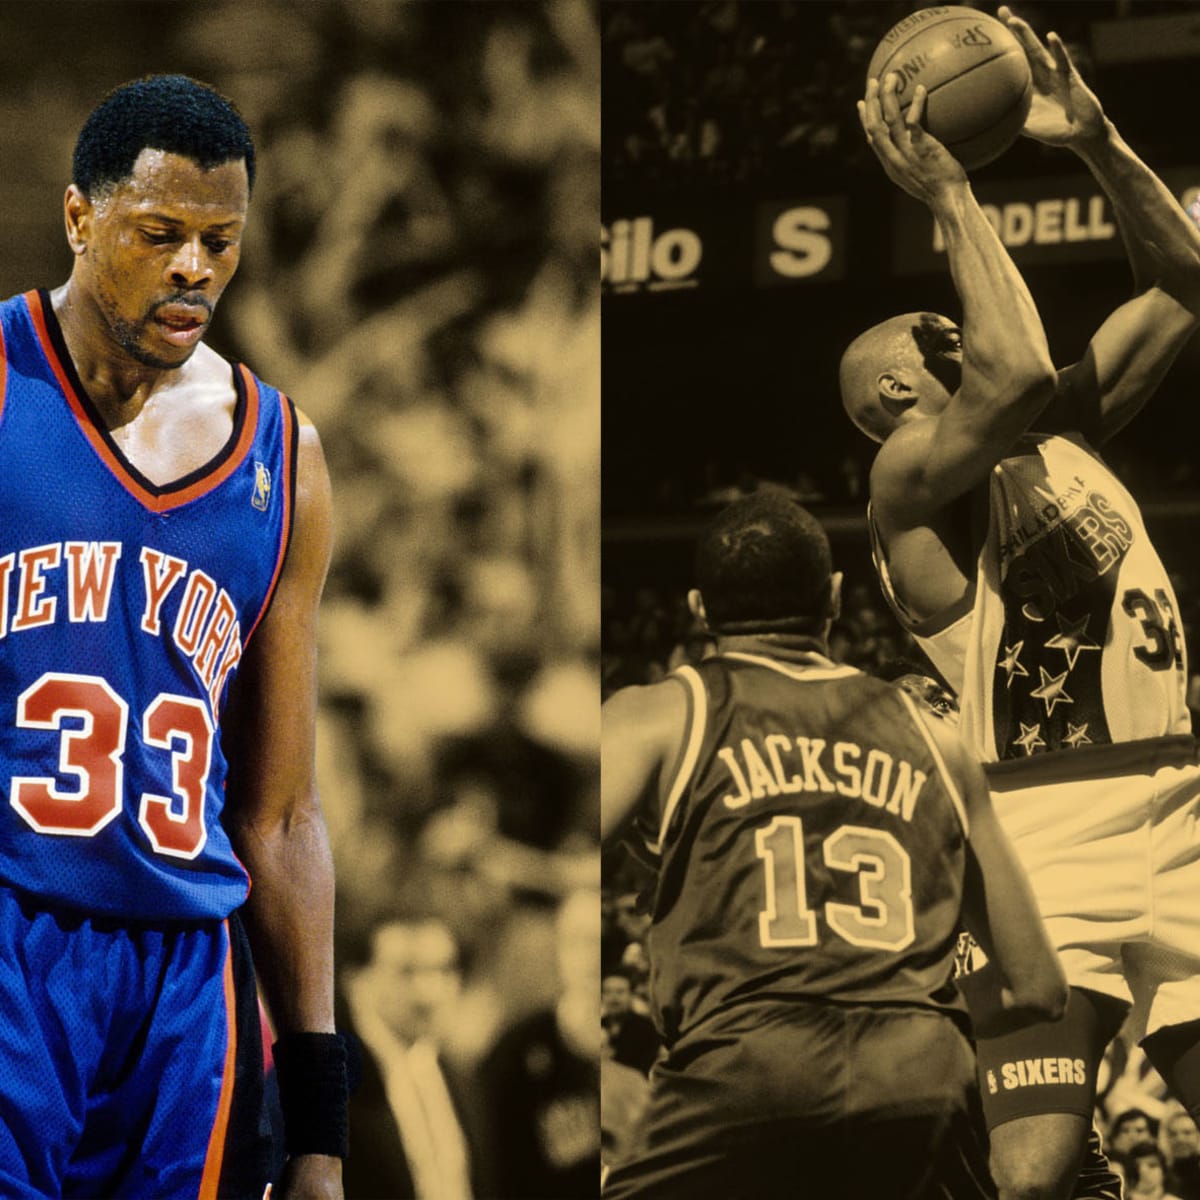 Charles Oakley gripes about Patrick Ewing, wants to 'smack